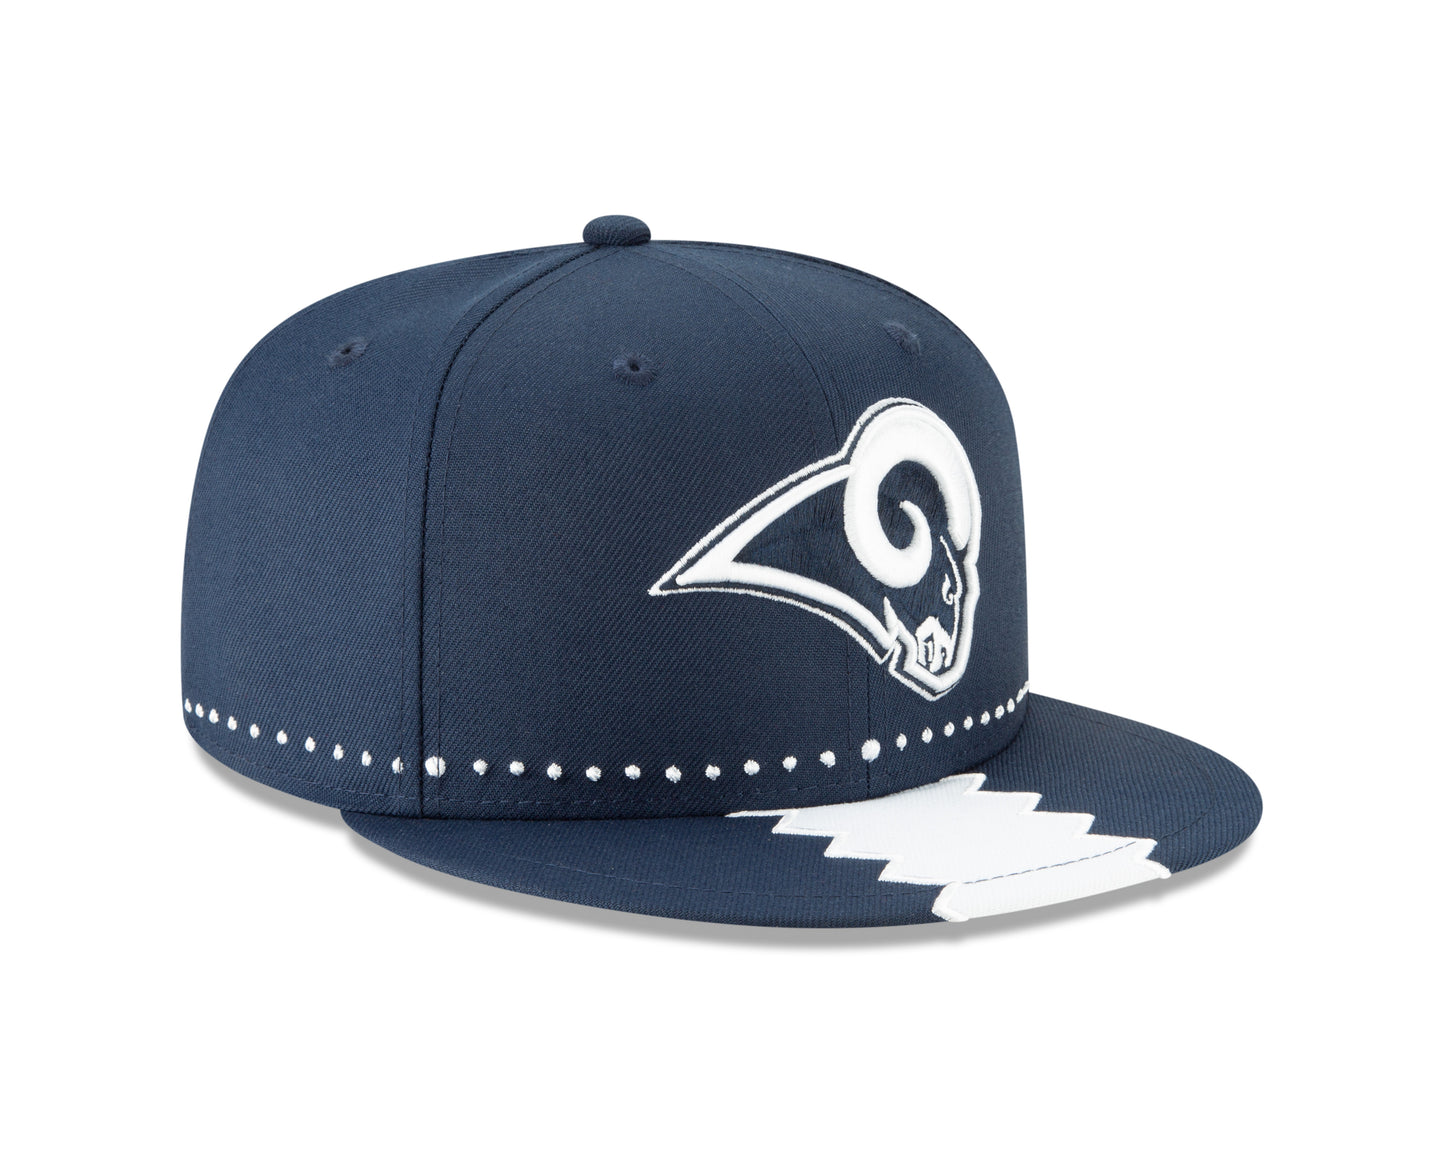 Los Angeles Rams New Era NFL Official Draft On-Stage 9FIFTY Snapback Hat